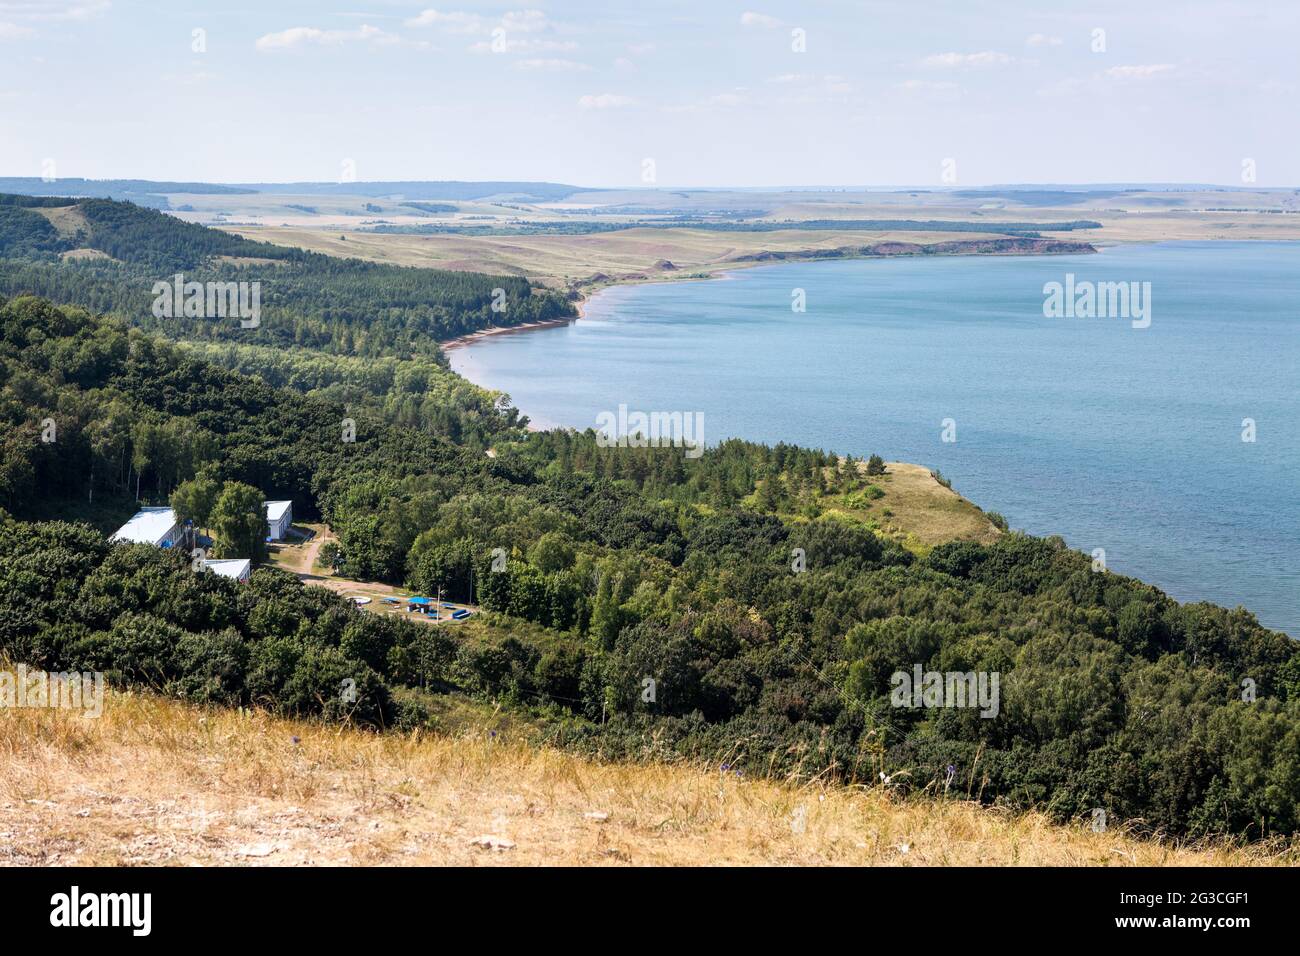 Shore of the Aslykul lake with children summer camp. Aerial view. The Republic of Bashkortostan, Russia Stock Photo